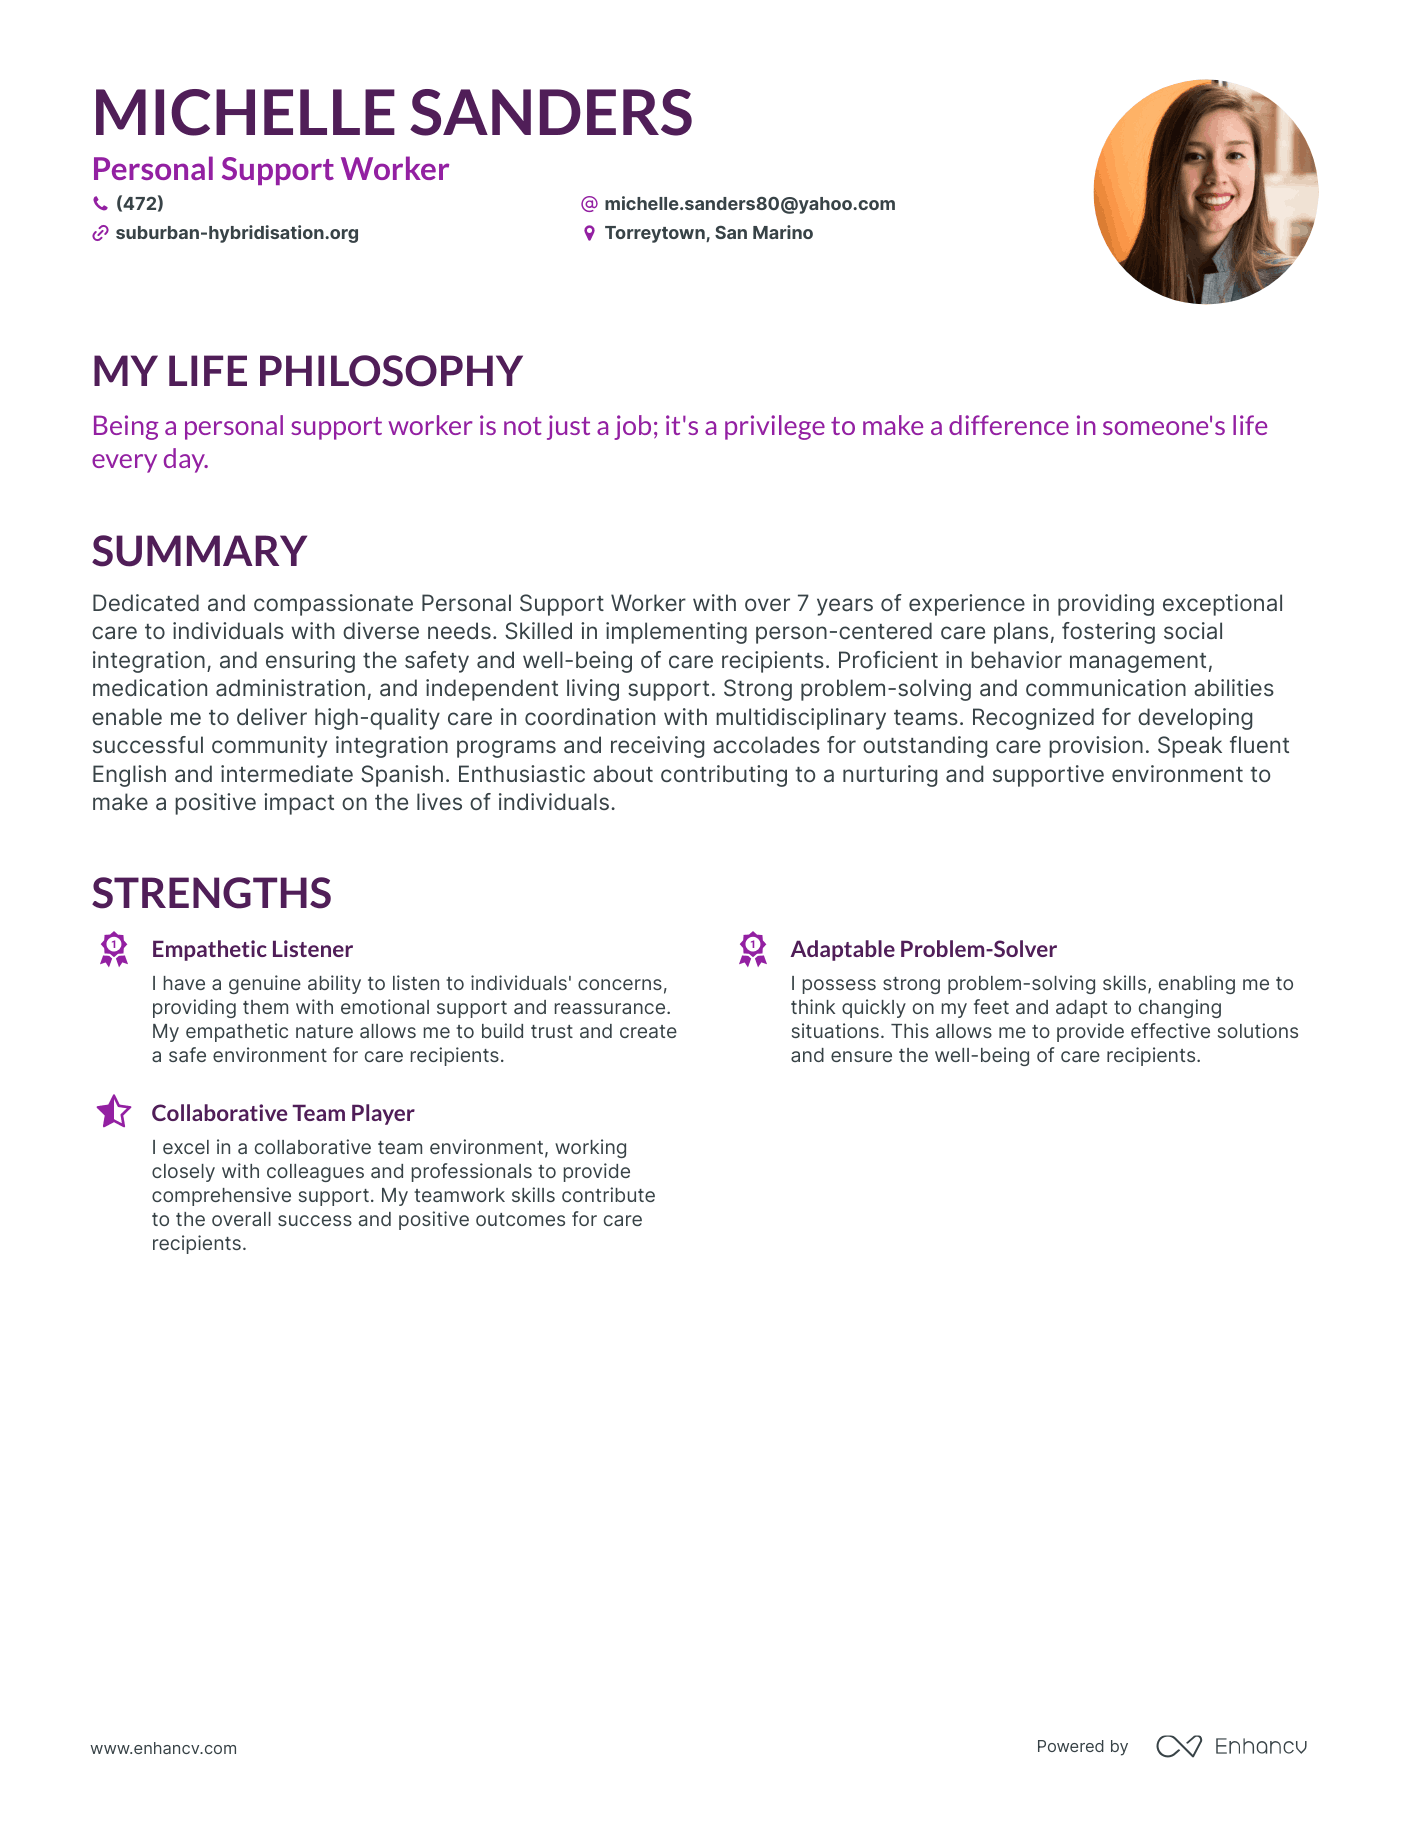 support worker resume template